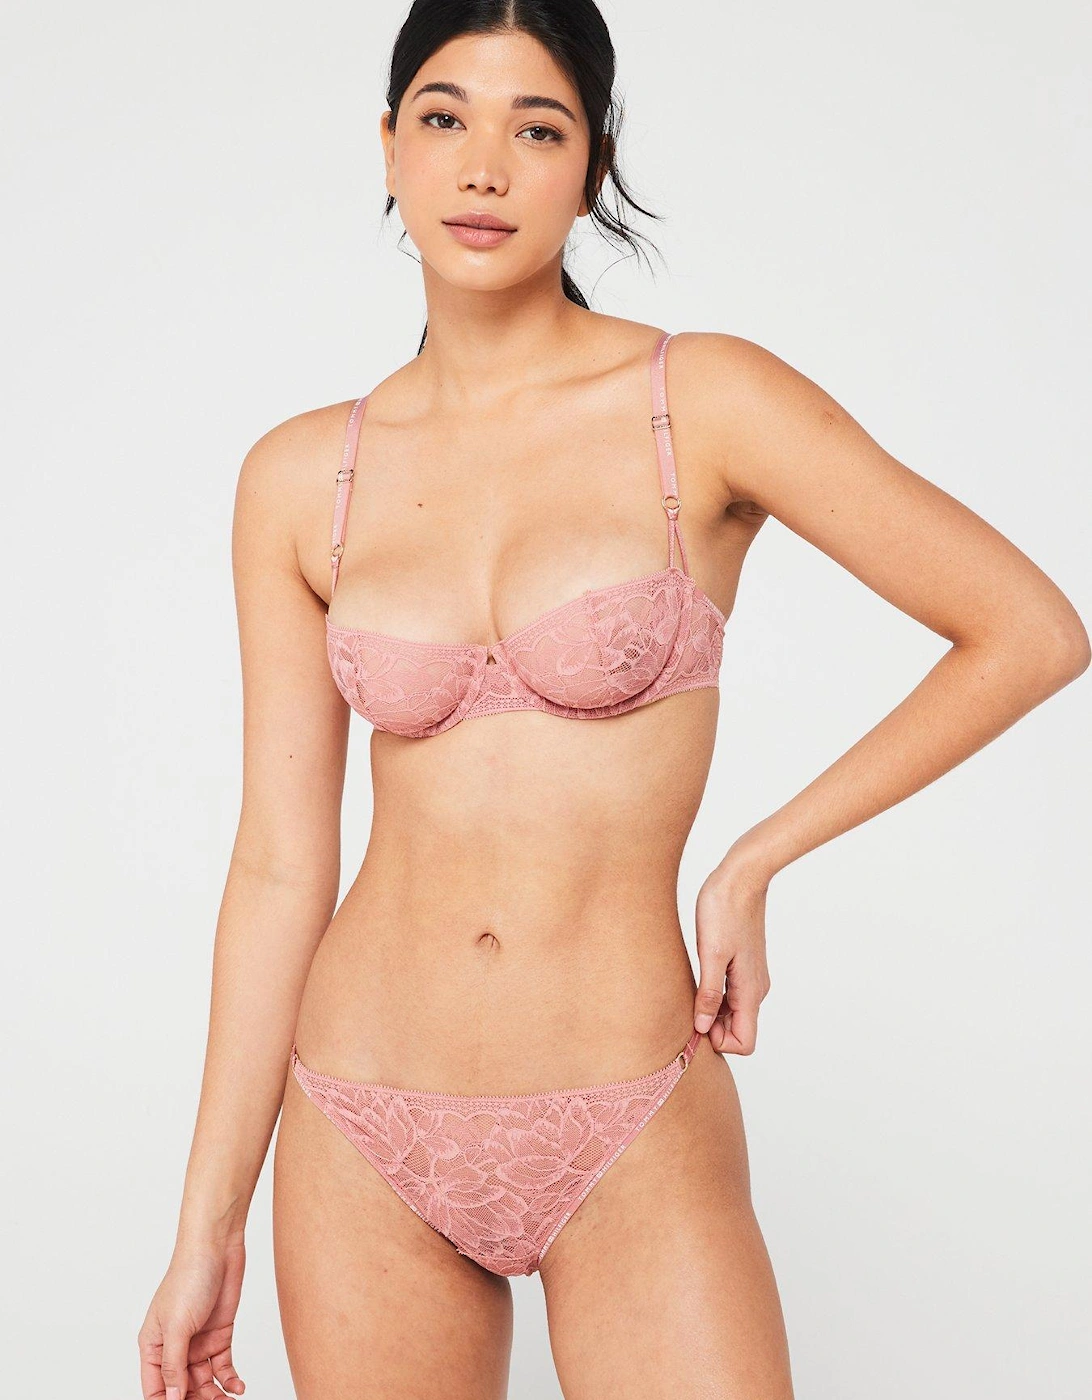 Lace Brief - Pink